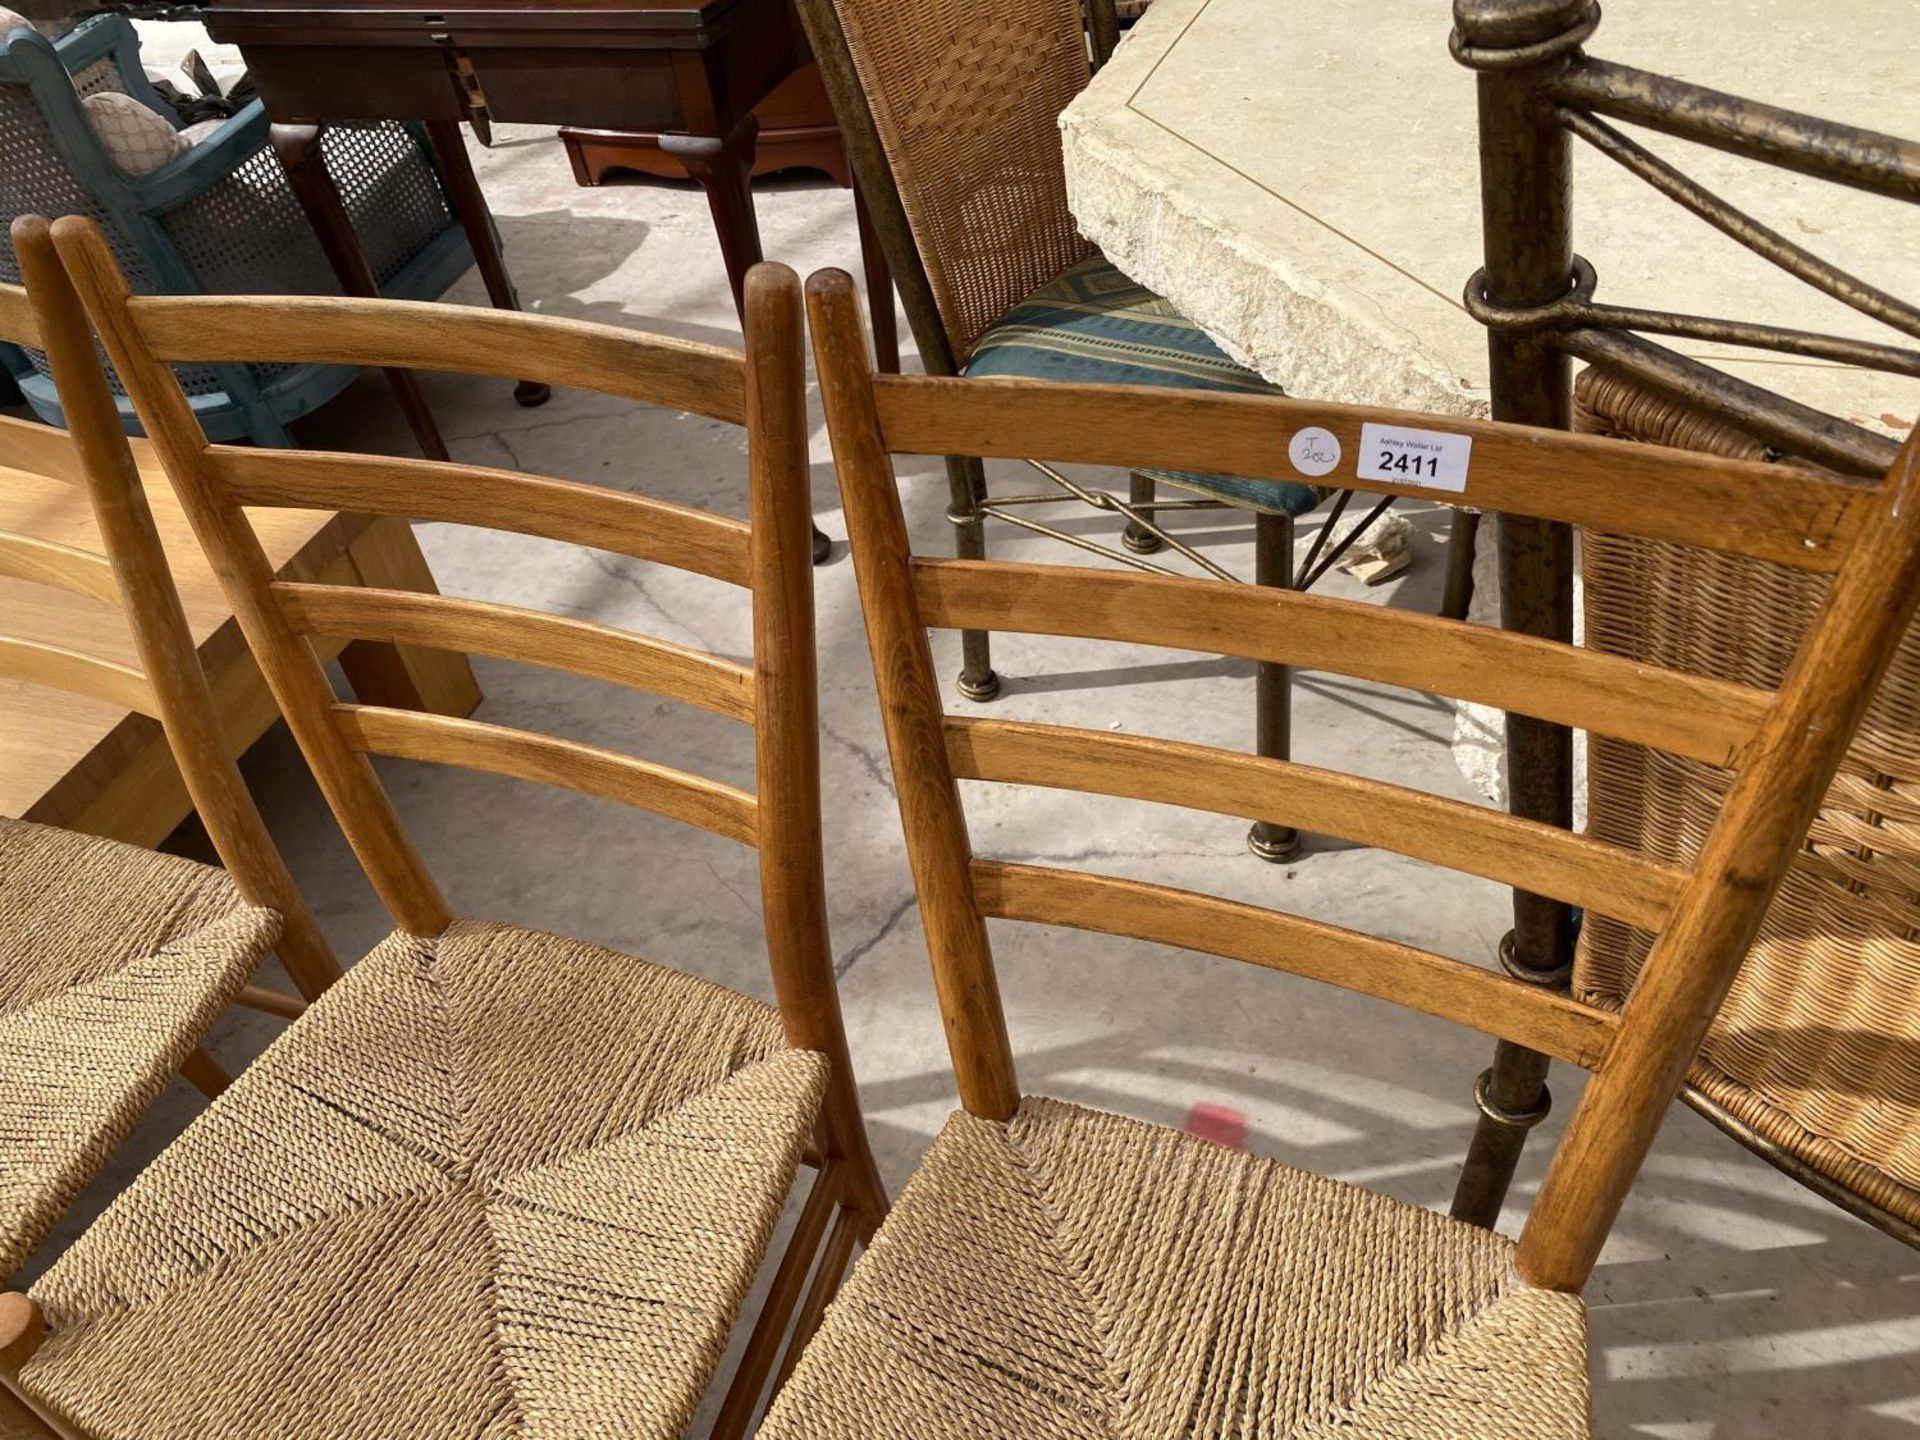 A SET OF THREE RETRO BEECH RATTAN SEATED CHAIRS WITH LADDERBACKS - Image 2 of 4